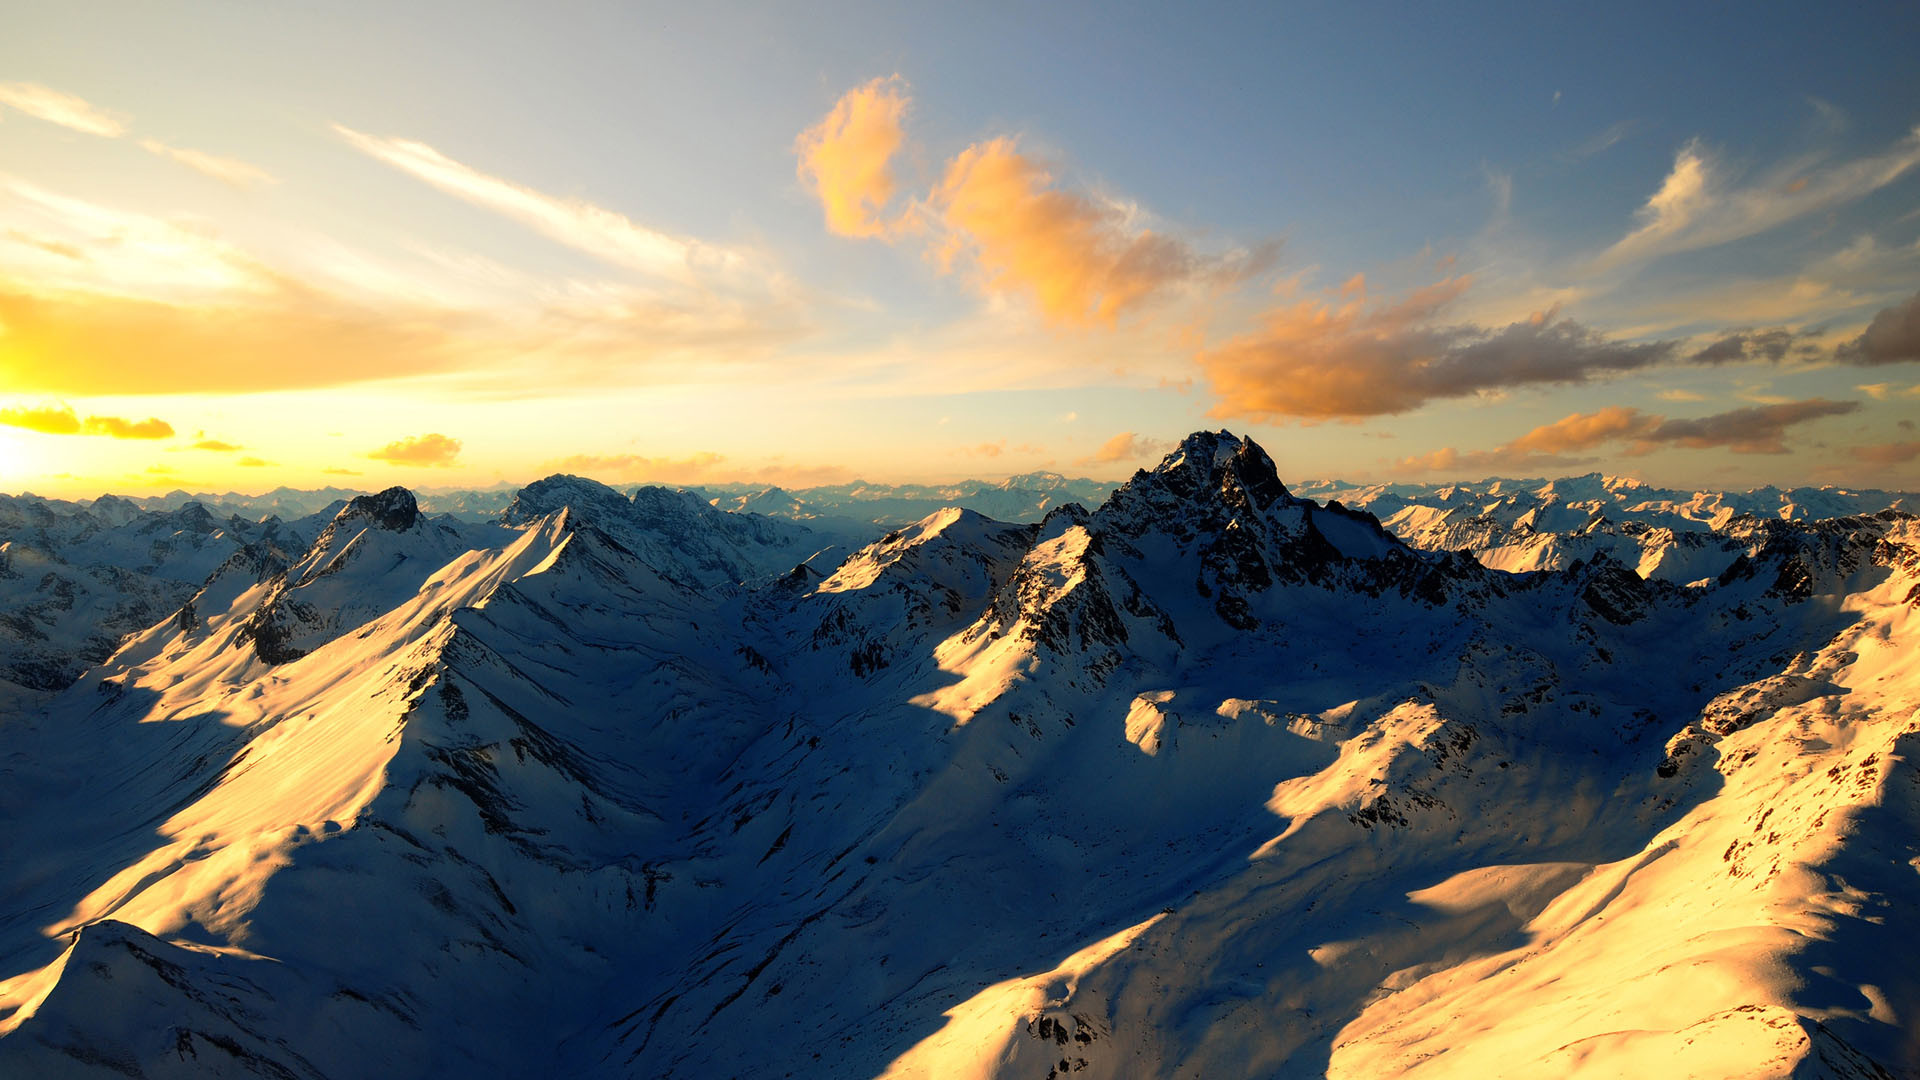 1920x1080 Free Desktop Wallpapers Backgrounds Snow Mountain Wallpapers